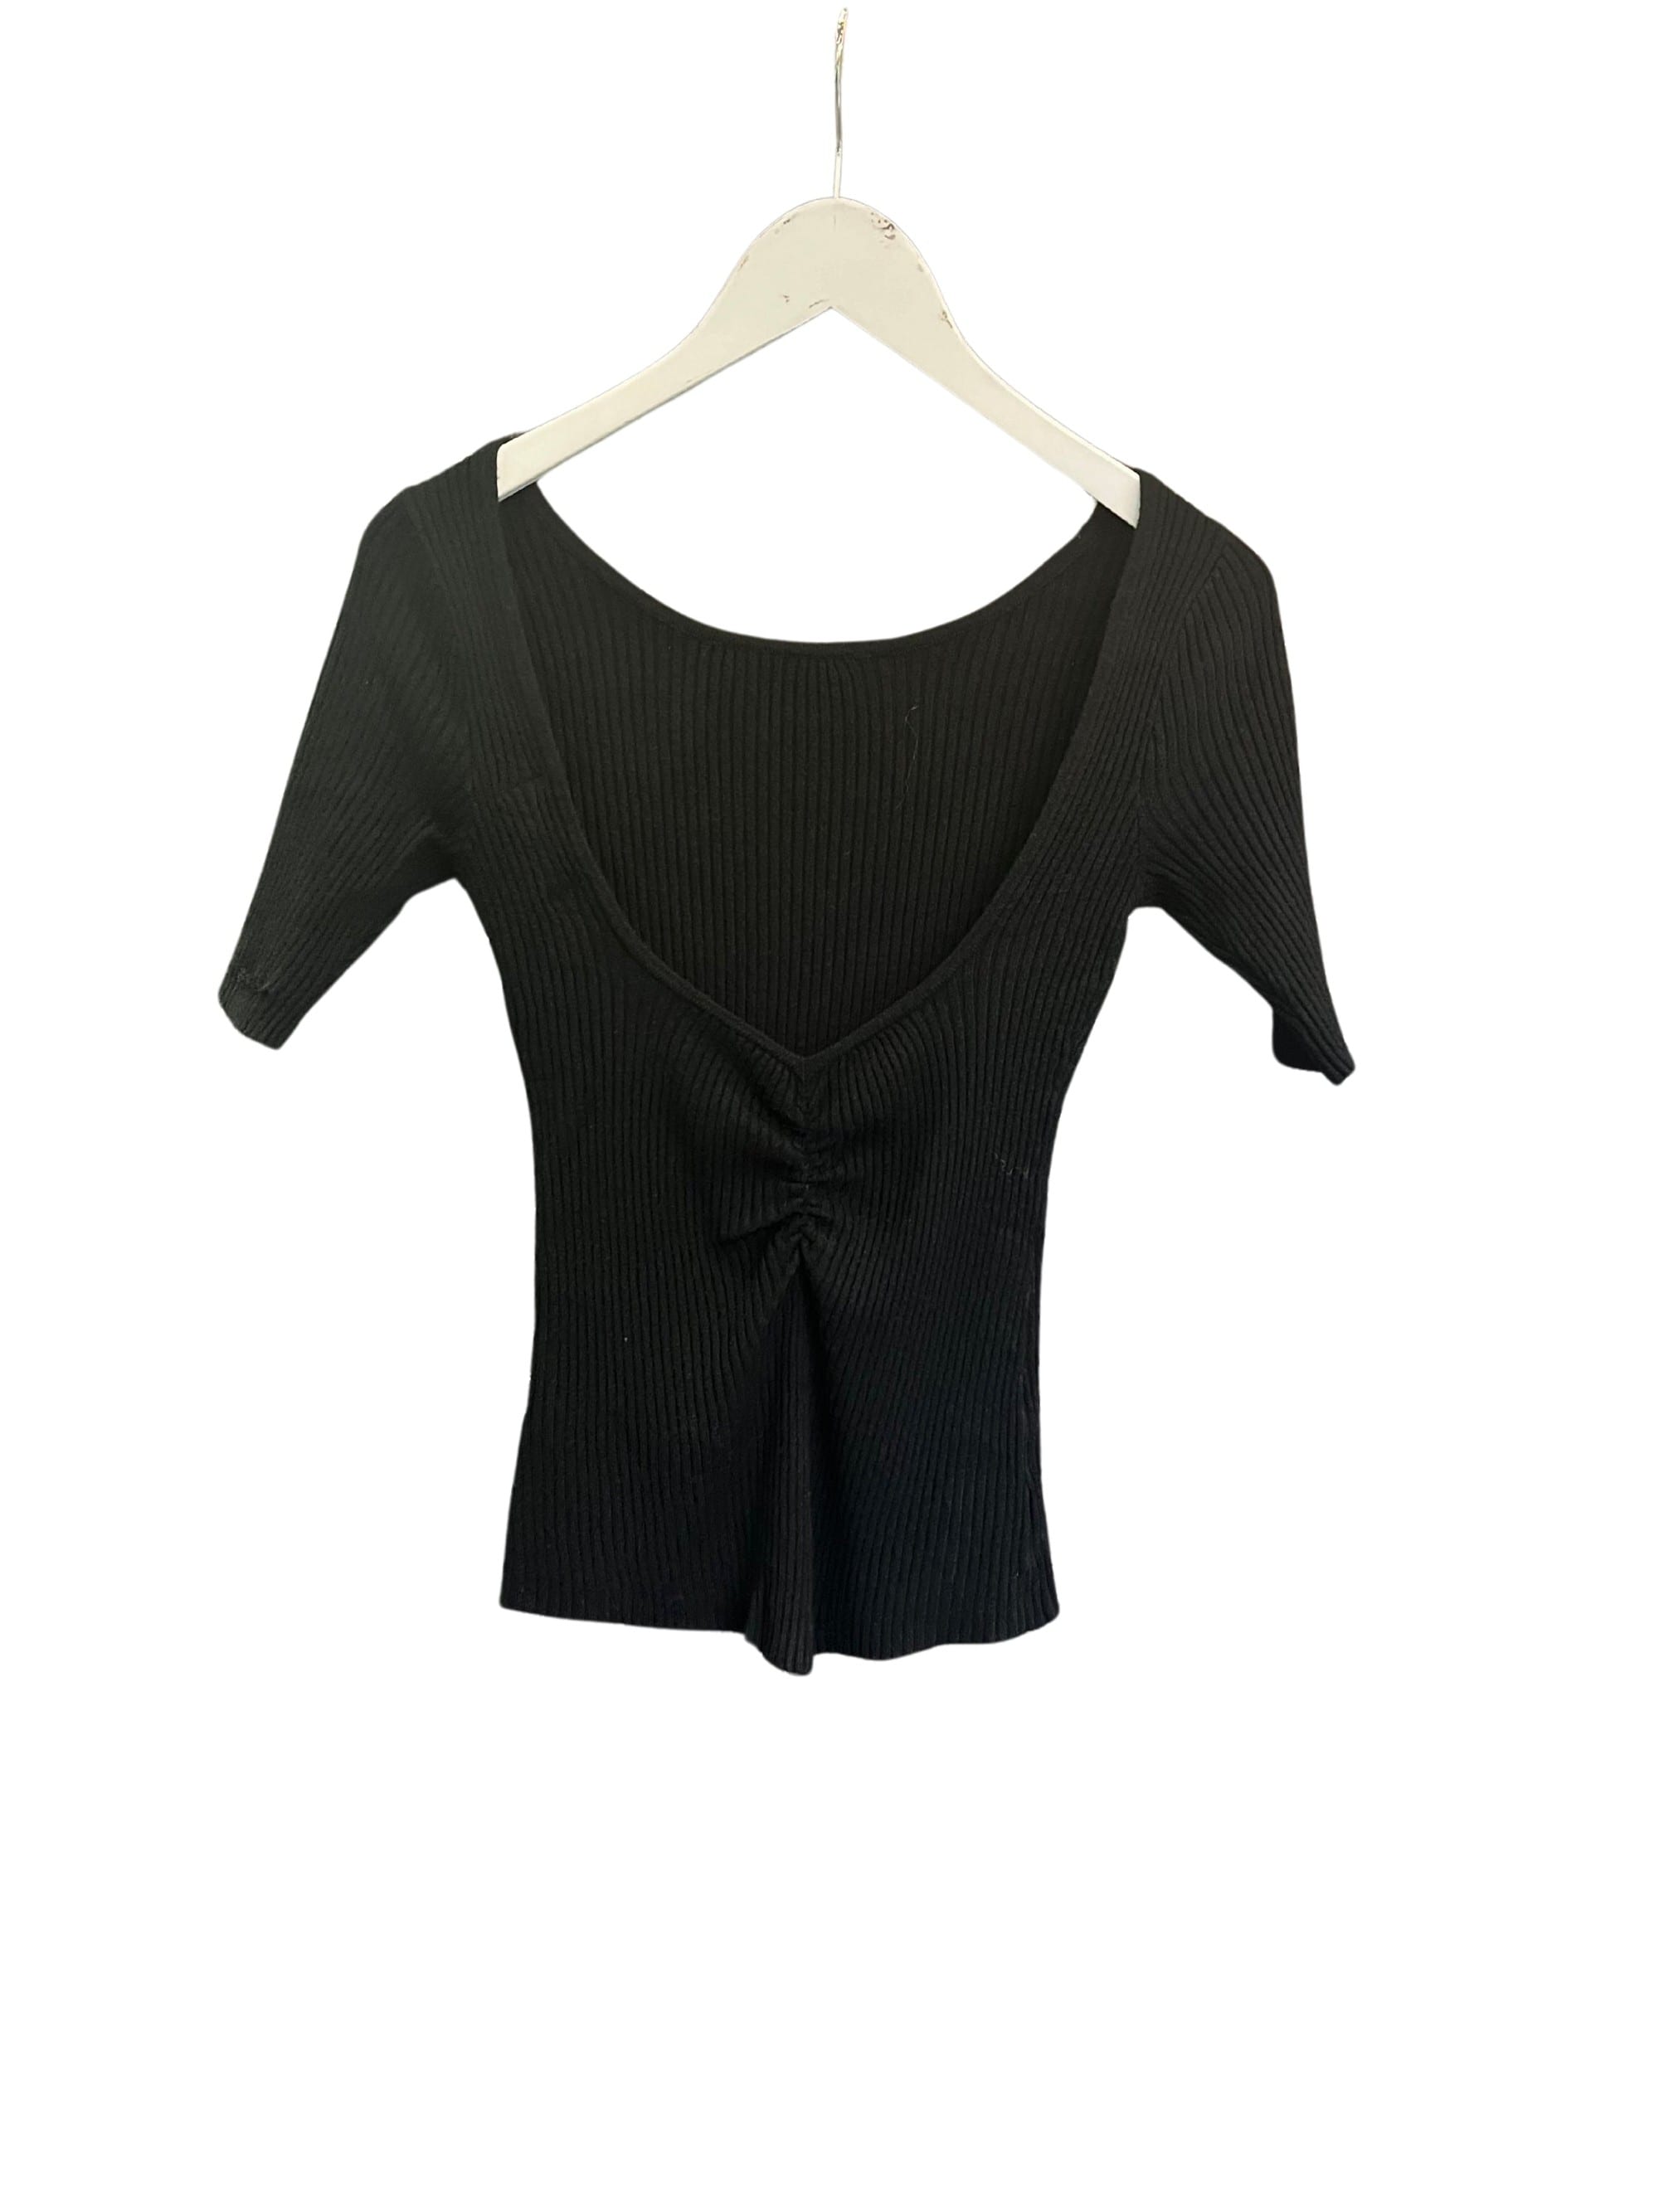 Clever Alice Backless Top in Black - clever alice